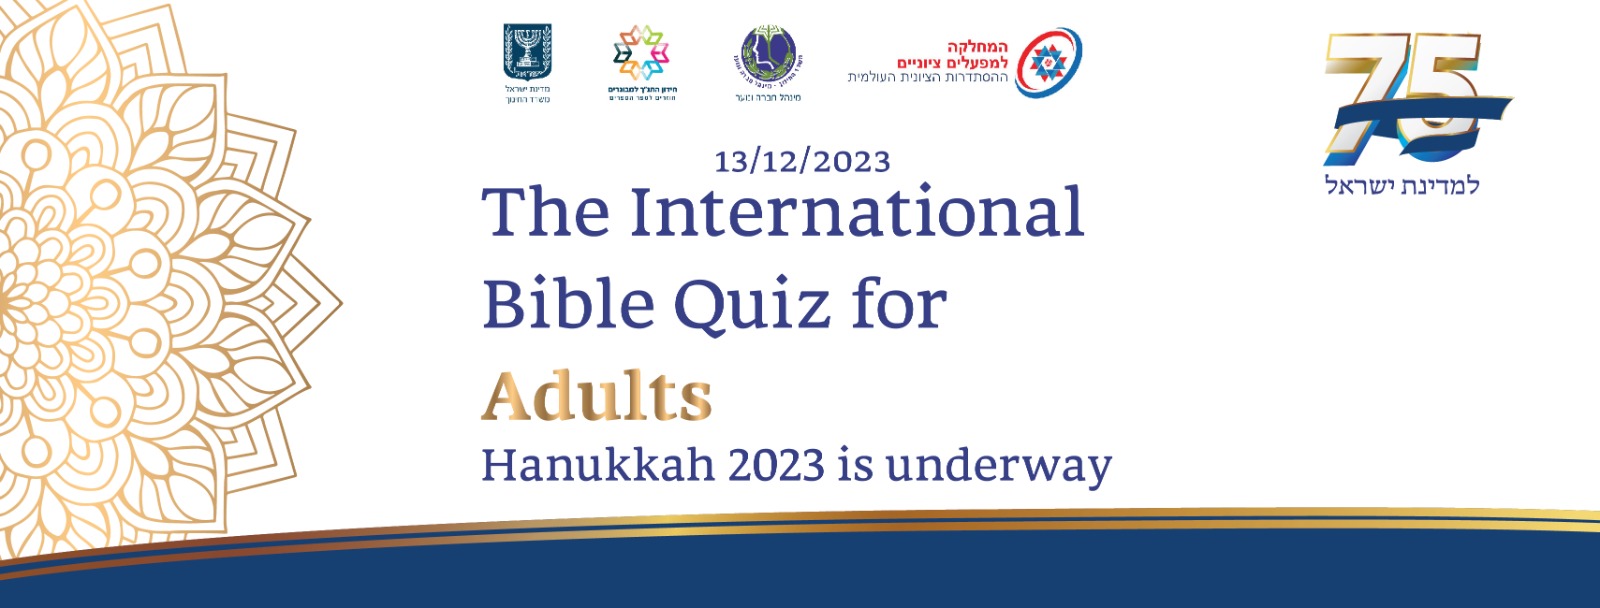 Bible Quiz for Adults 2023